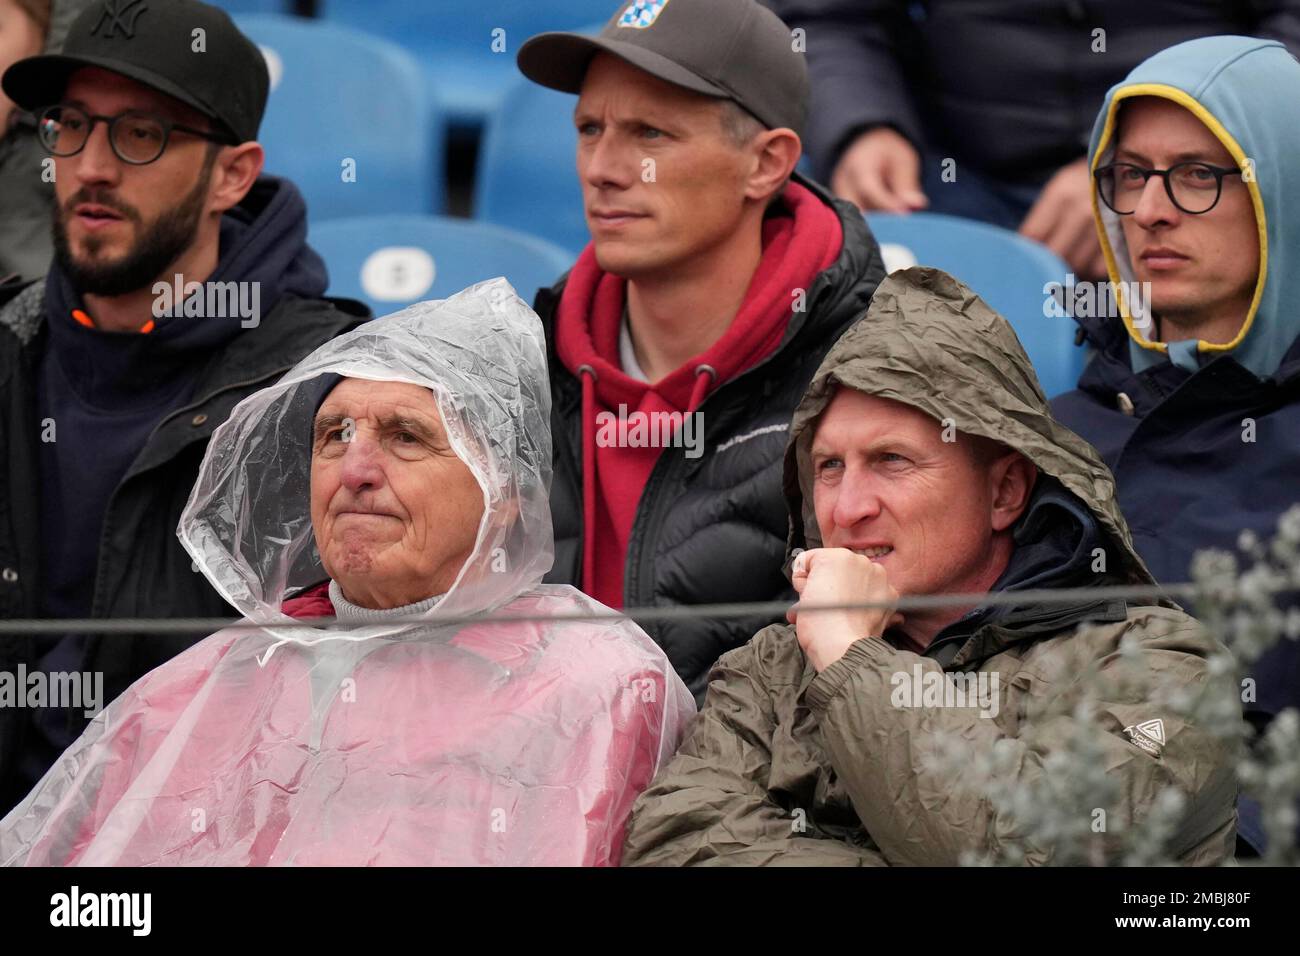 Spectators watch the semifinal match between Botic Van De Zandschulp of the Netherlands and Miomir Kecmanovic of Serbia at the Tennis ATP tournament in Munich, Germany, Saturday, April 30, 2022